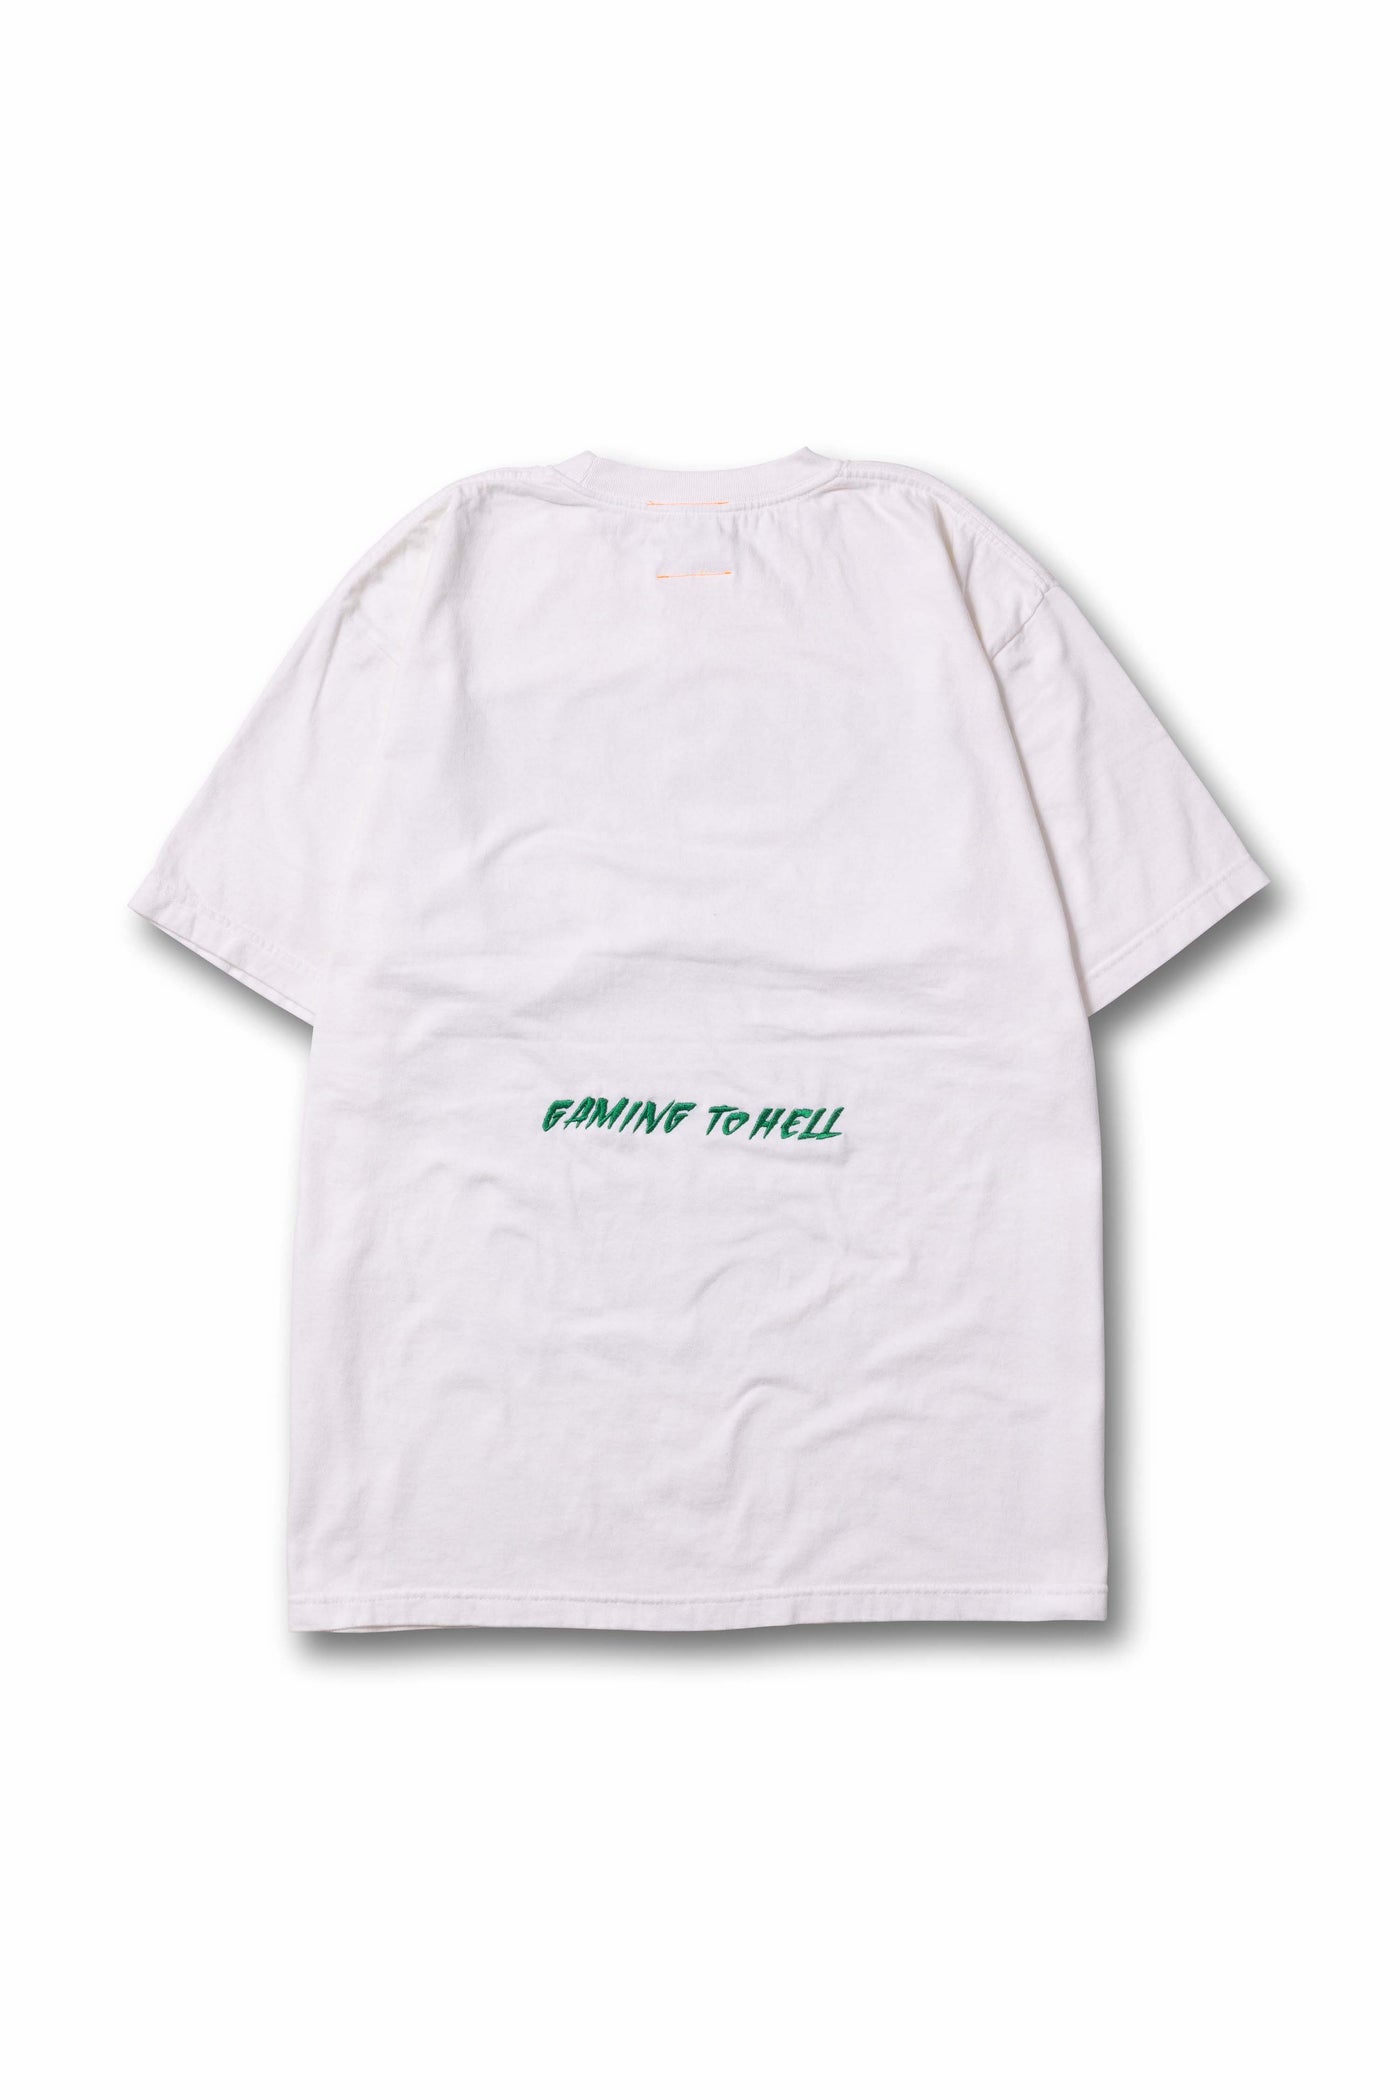 GAMING TO HELL TEE / OFF WHITE – VAULTROOM